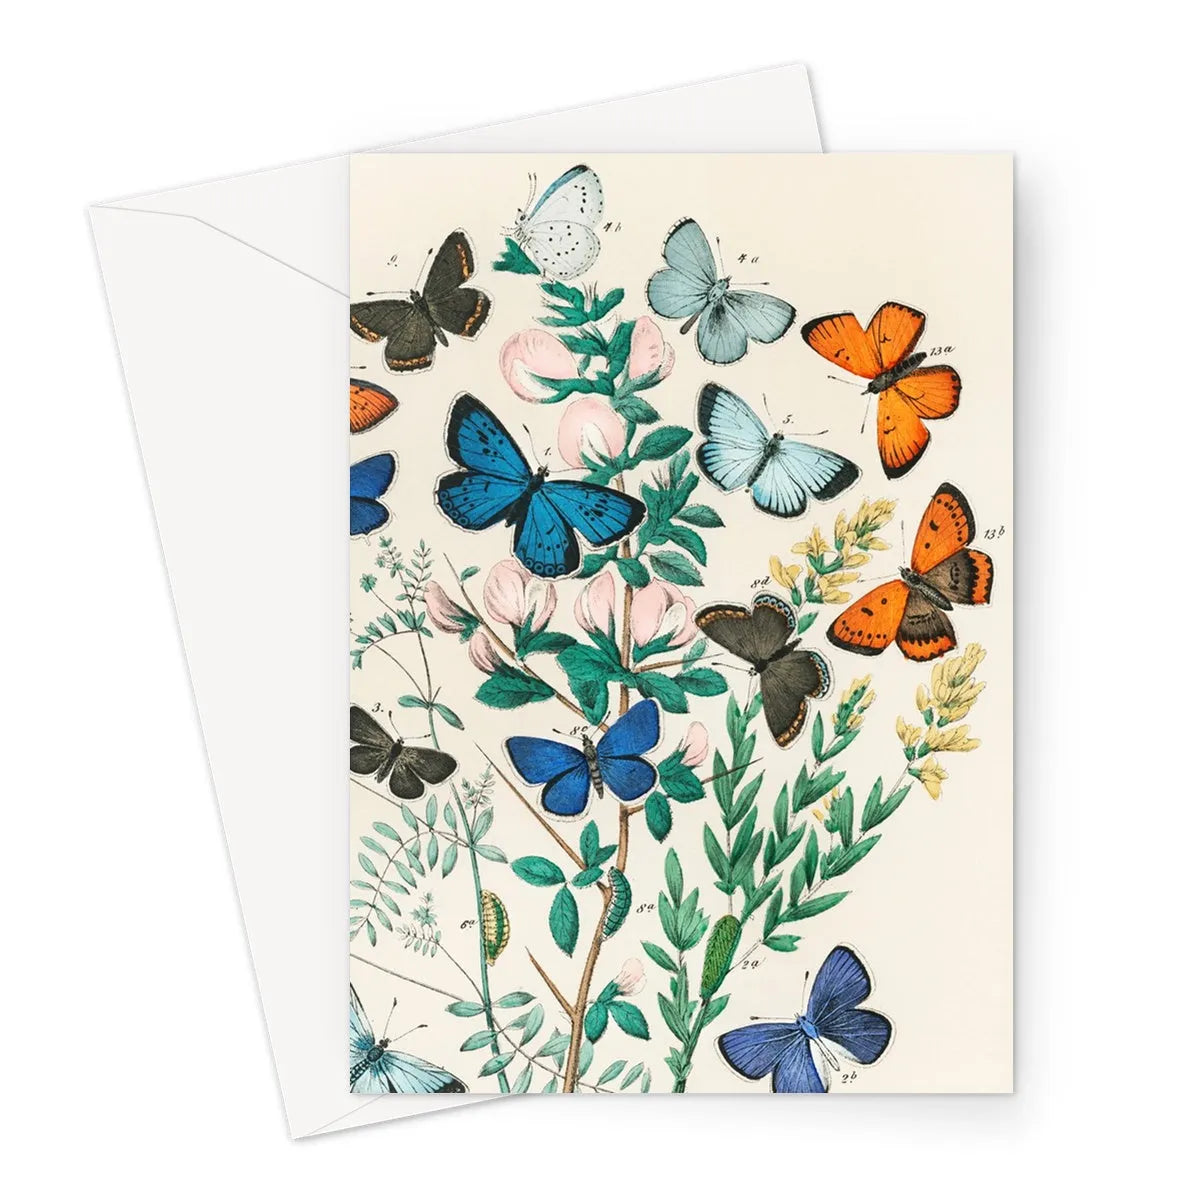 European Butterflies And Moths By William Forsell Kirby Greeting Card - A5 Portrait / 1 Card - Notebooks & Notepads